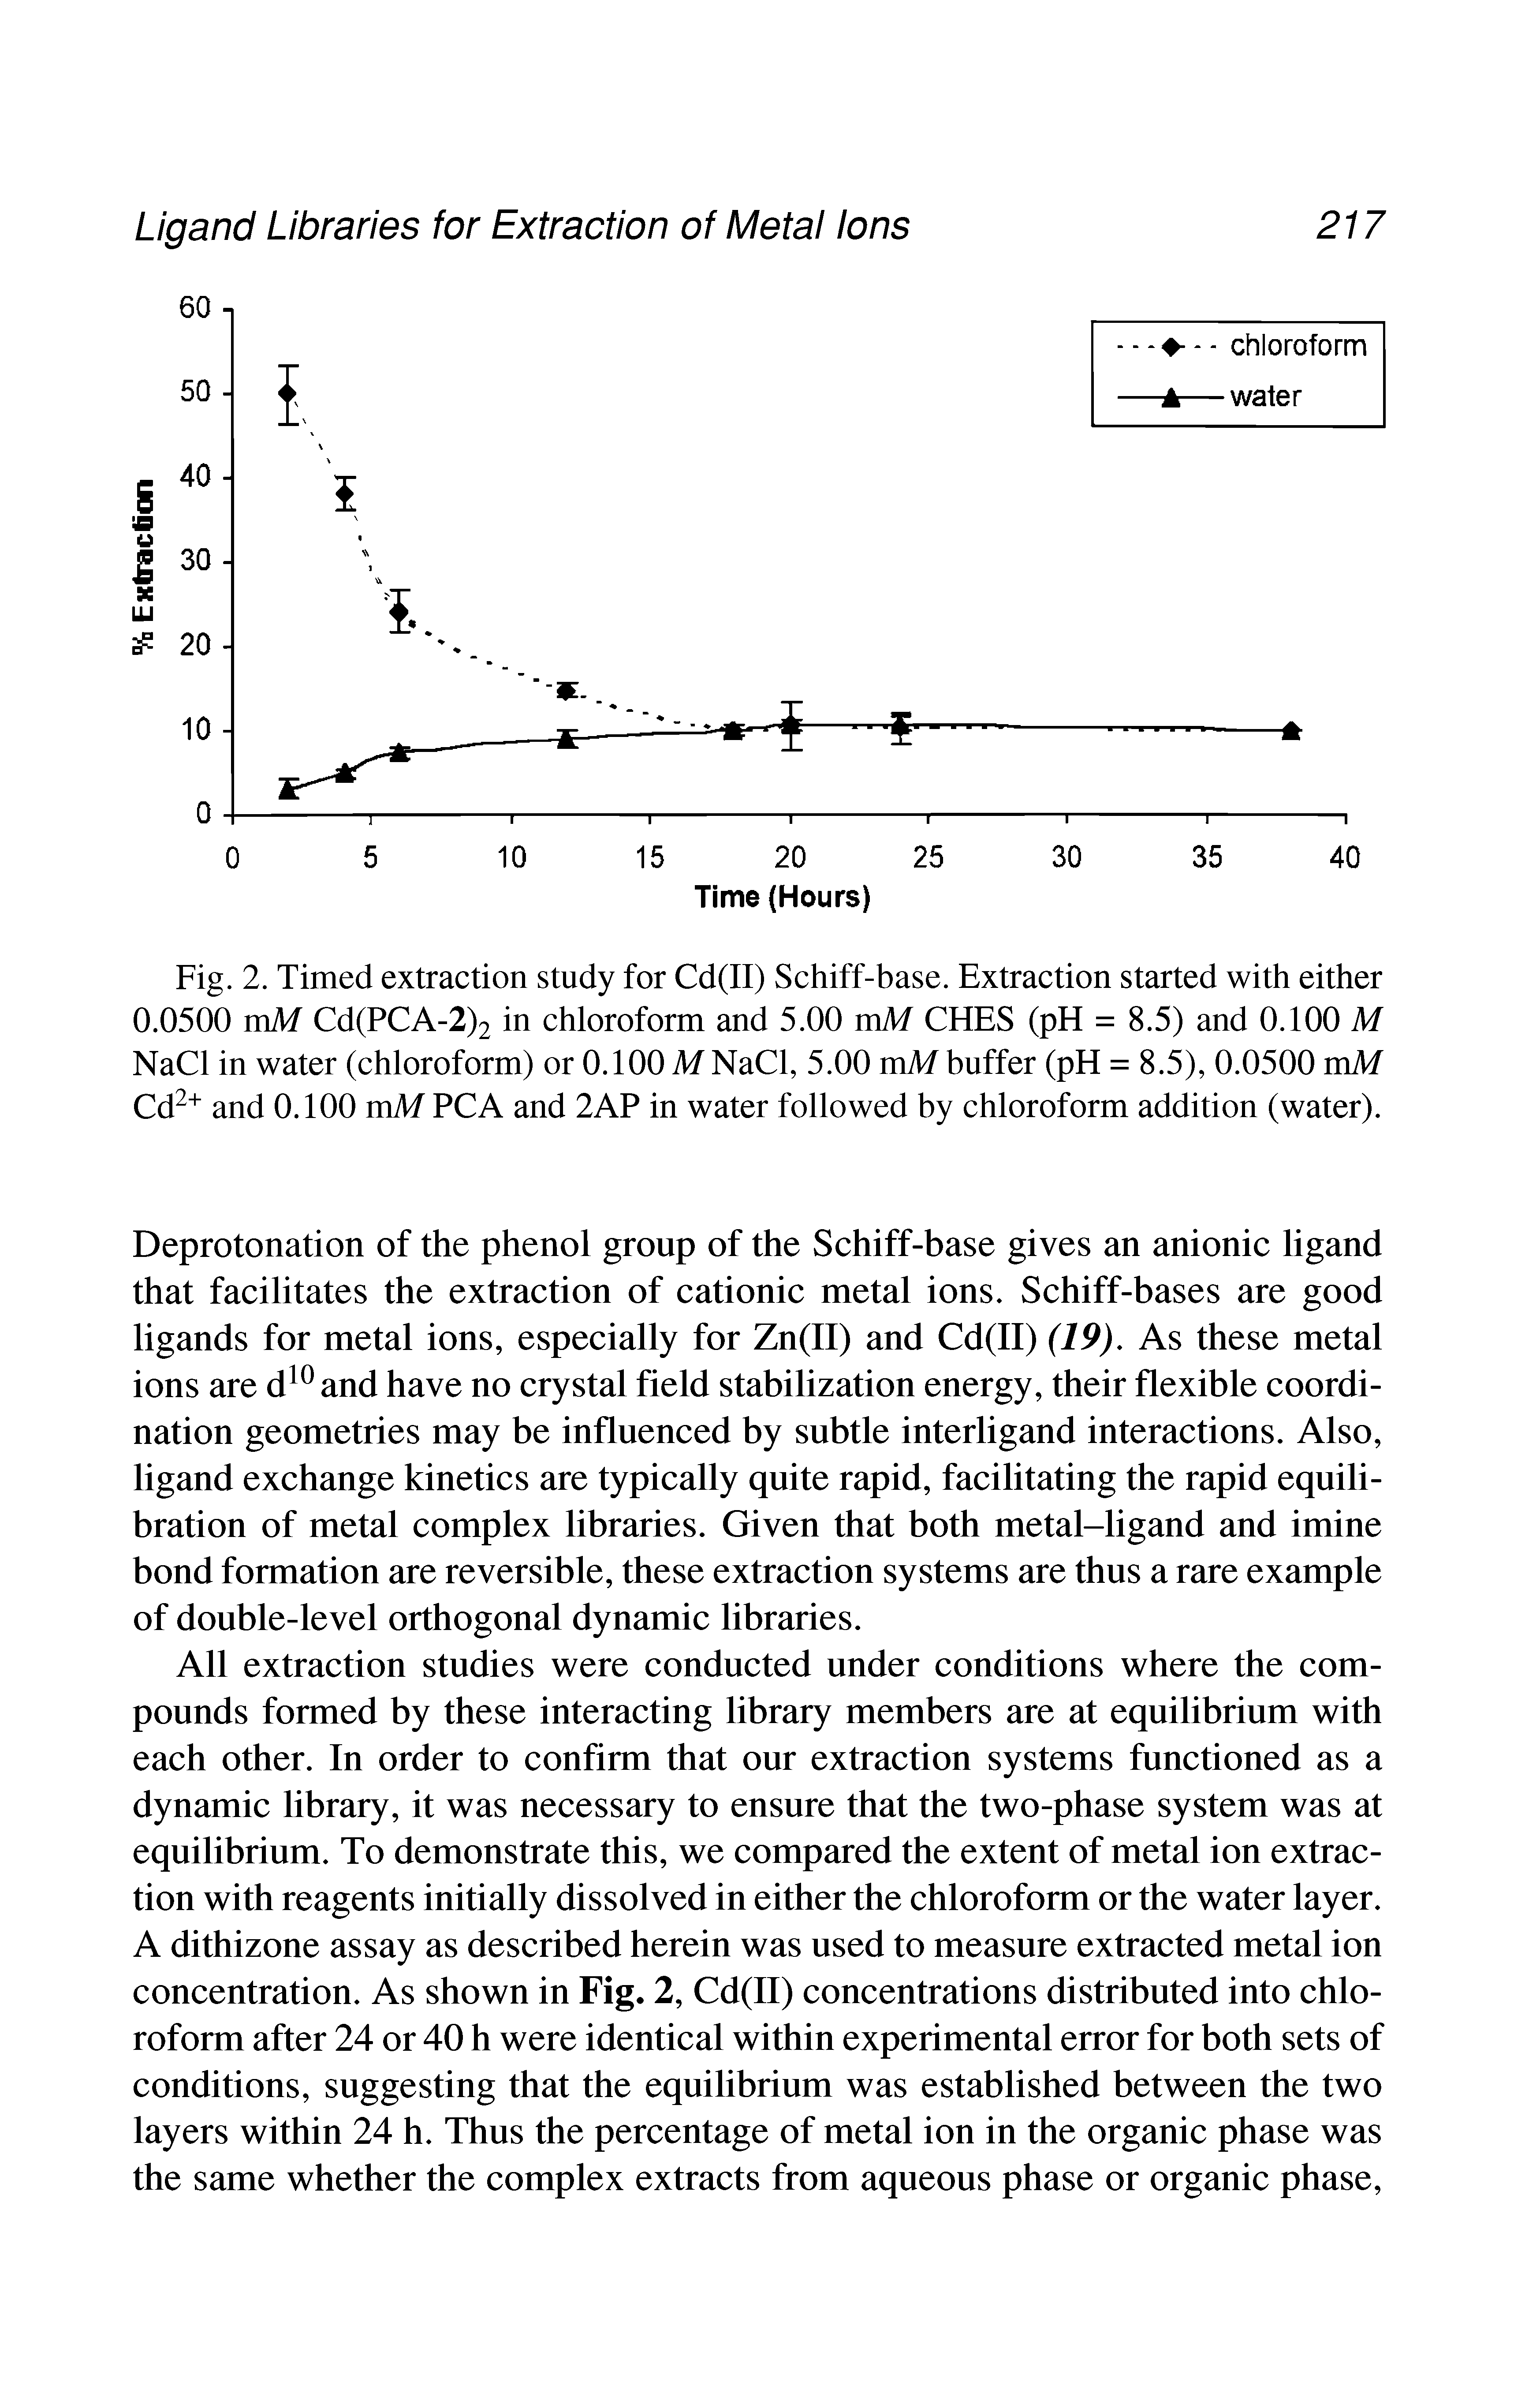 Fig. 2. Timed extraction study for Cd(II) Schiff-base. Extraction started with either 0.0500 mM Cd(PCA-2)2 in chloroform and 5.00 mM CHES (pH = 8.5) and 0.100 M NaCl in water (chloroform) or 0.100 M NaCl, 5.00 mM buffer (pH = 8.5), 0.0500 mM and 0.100 mM PC A and 2AP in water followed by chloroform addition (water).